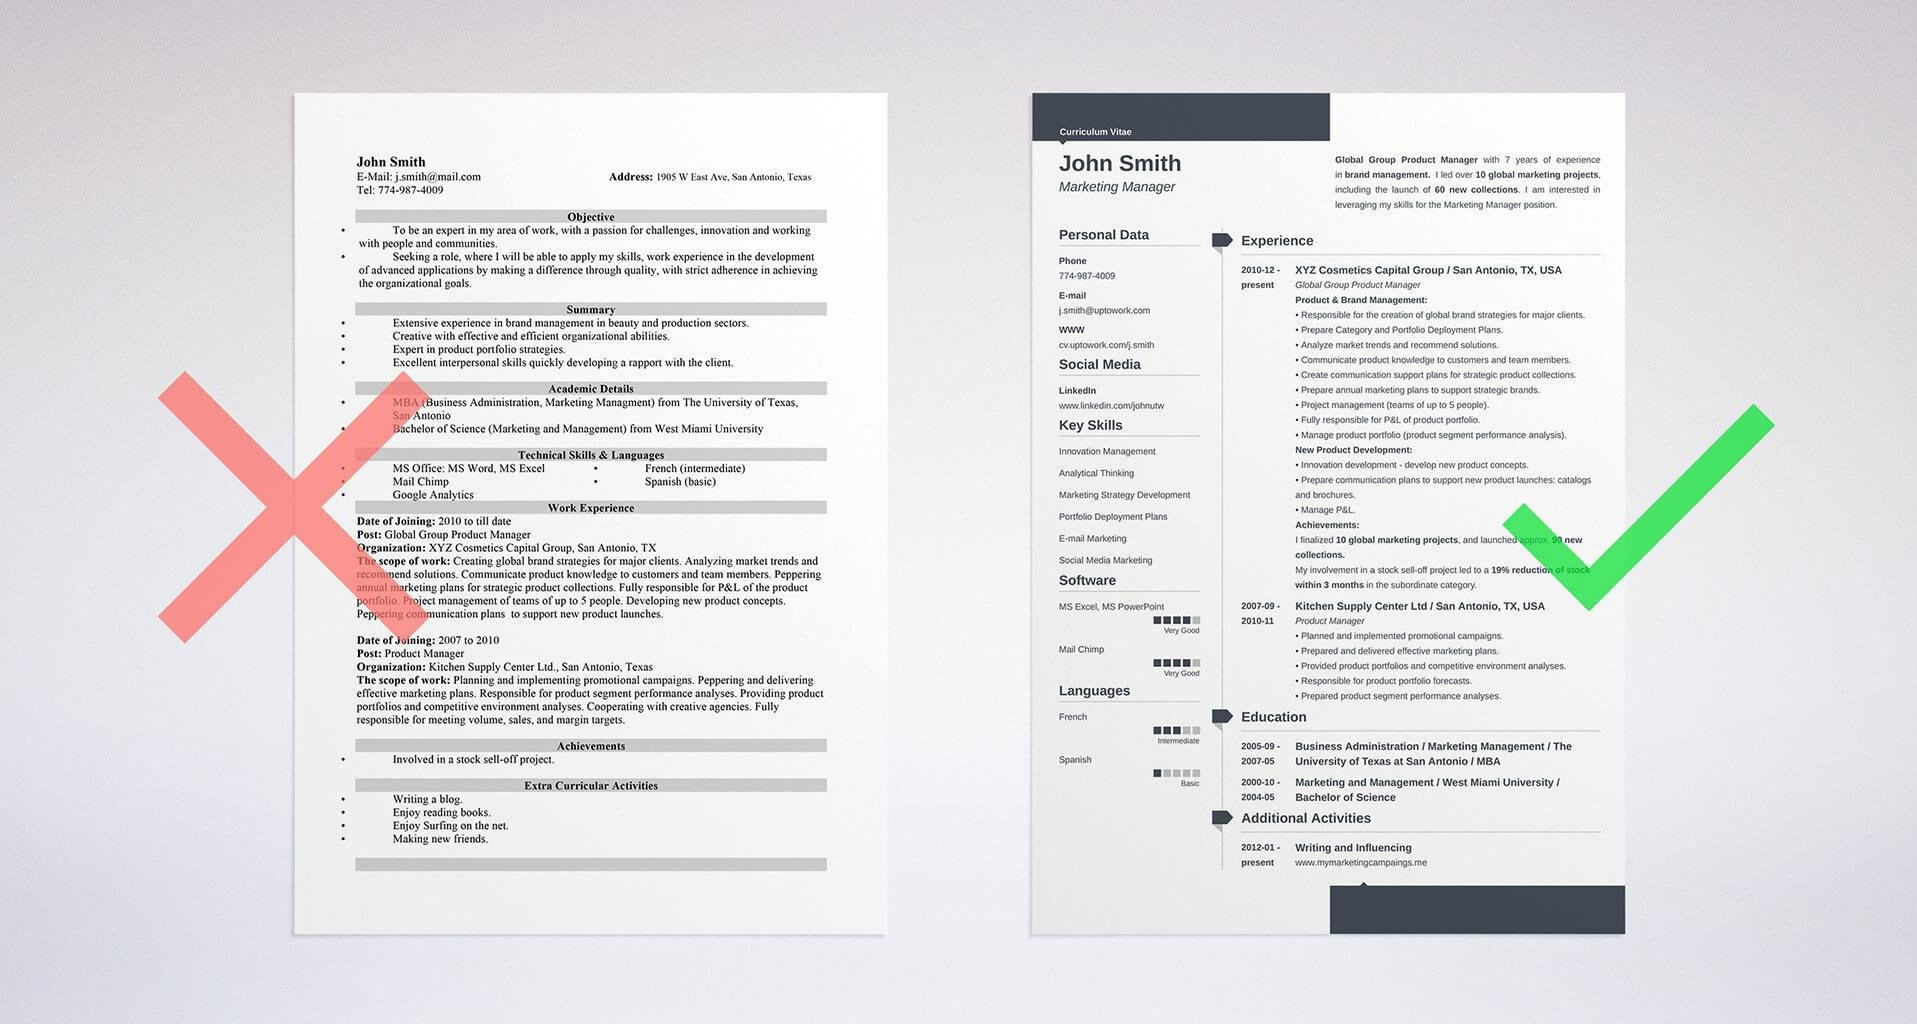 Bachelor S Degree On Resume Sample How to List Education On A Resume: Section Examples & Tips